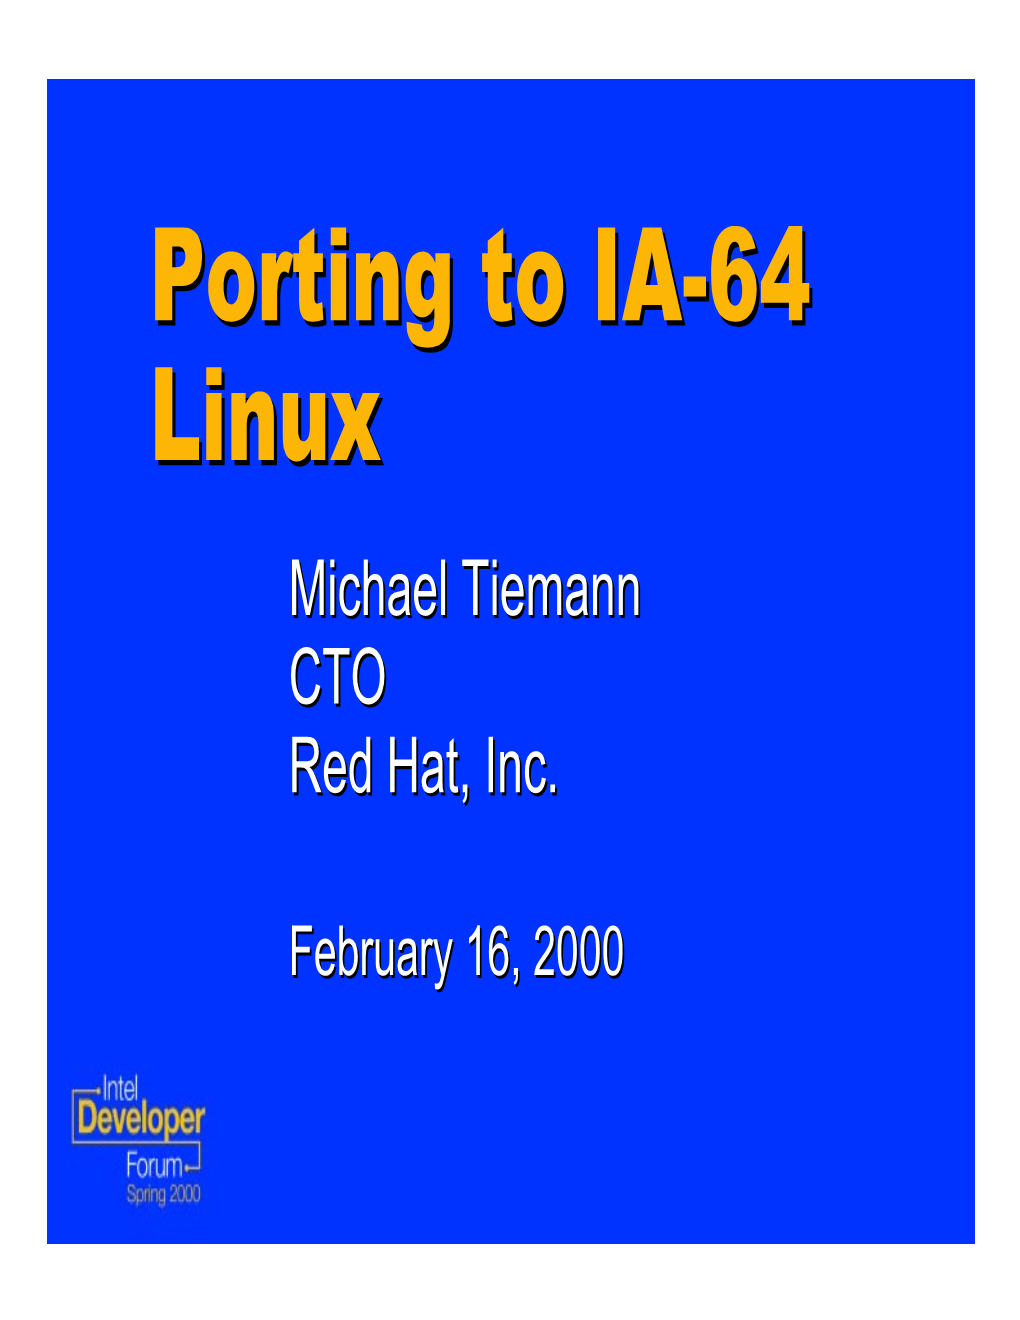 IA-64 Porting to Linux